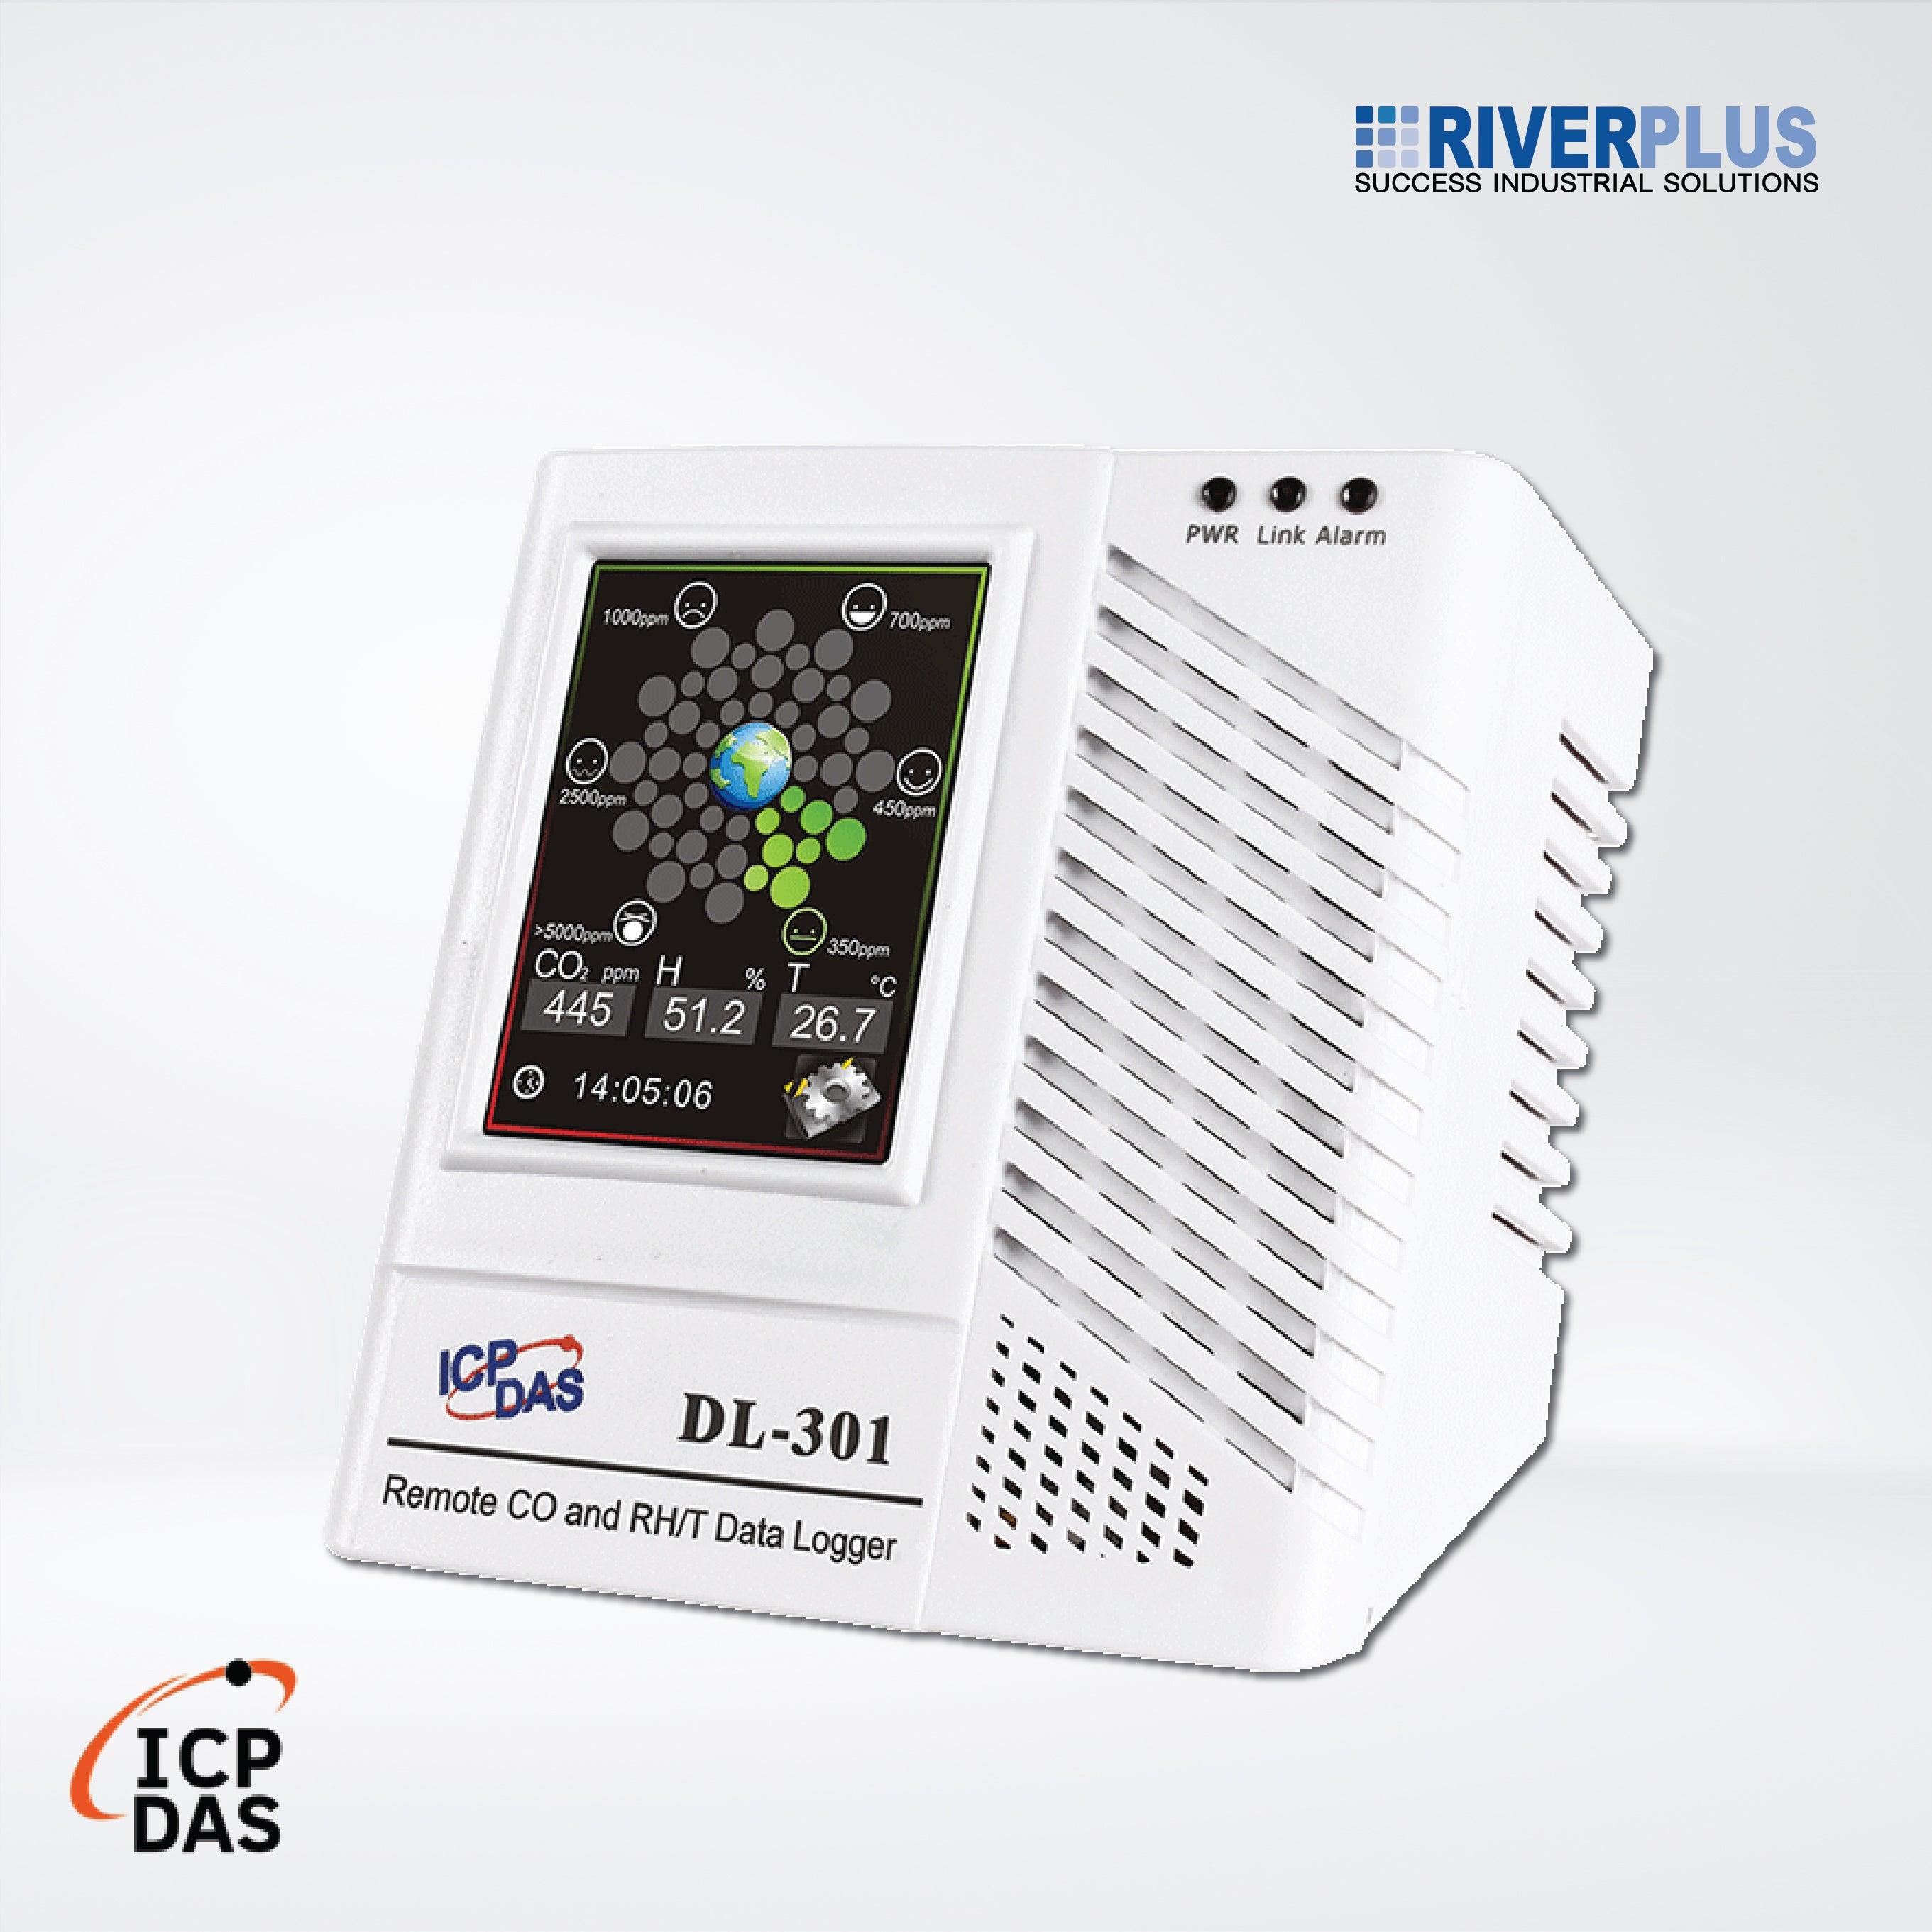 DL-301 Remote CO/Temperature/Humidity/Dew Point Data Logger - Riverplus